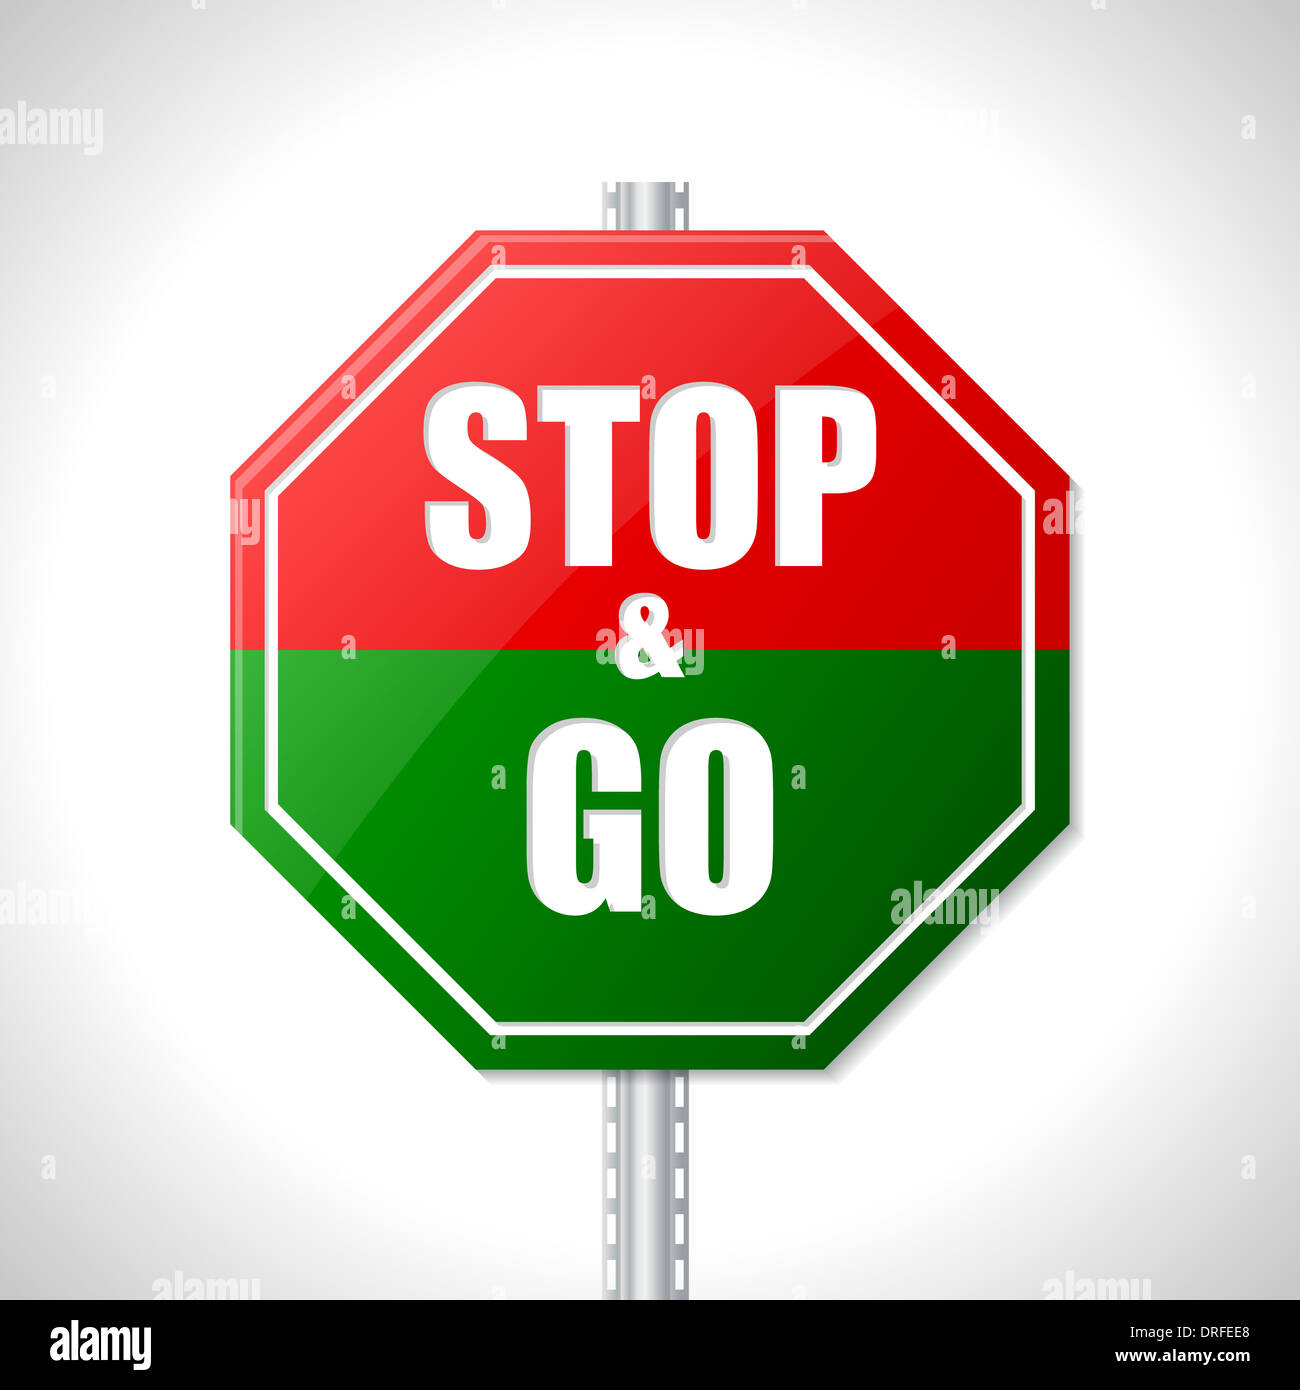 https://c8.alamy.com/comp/DRFEE8/stop-and-go-traffic-sign-for-racers-DRFEE8.jpg